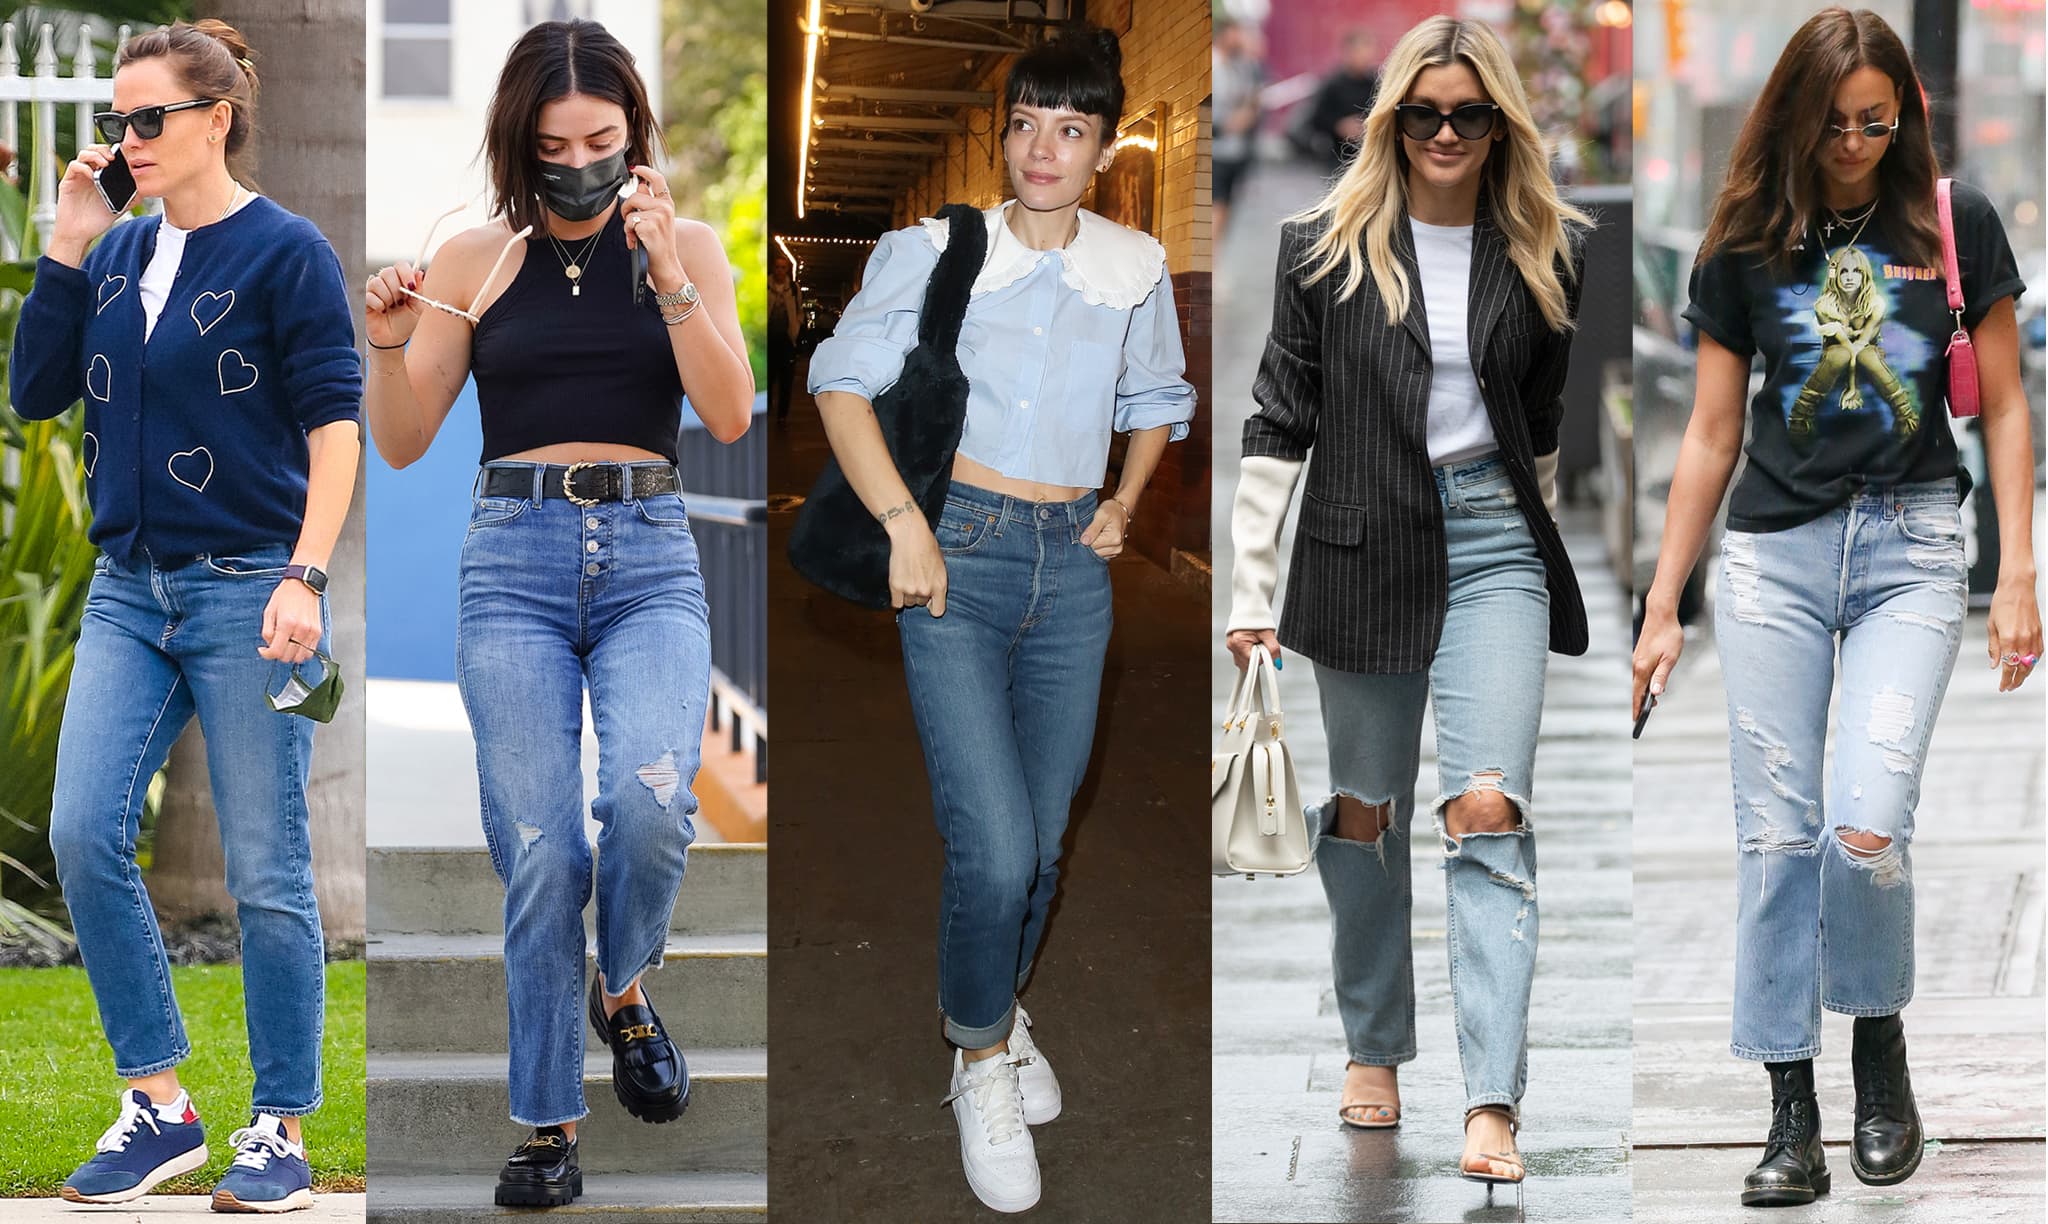 catalog color metric The 4 Best Shoe Styles to Wear With Mom Jeans and Shoes to Avoid